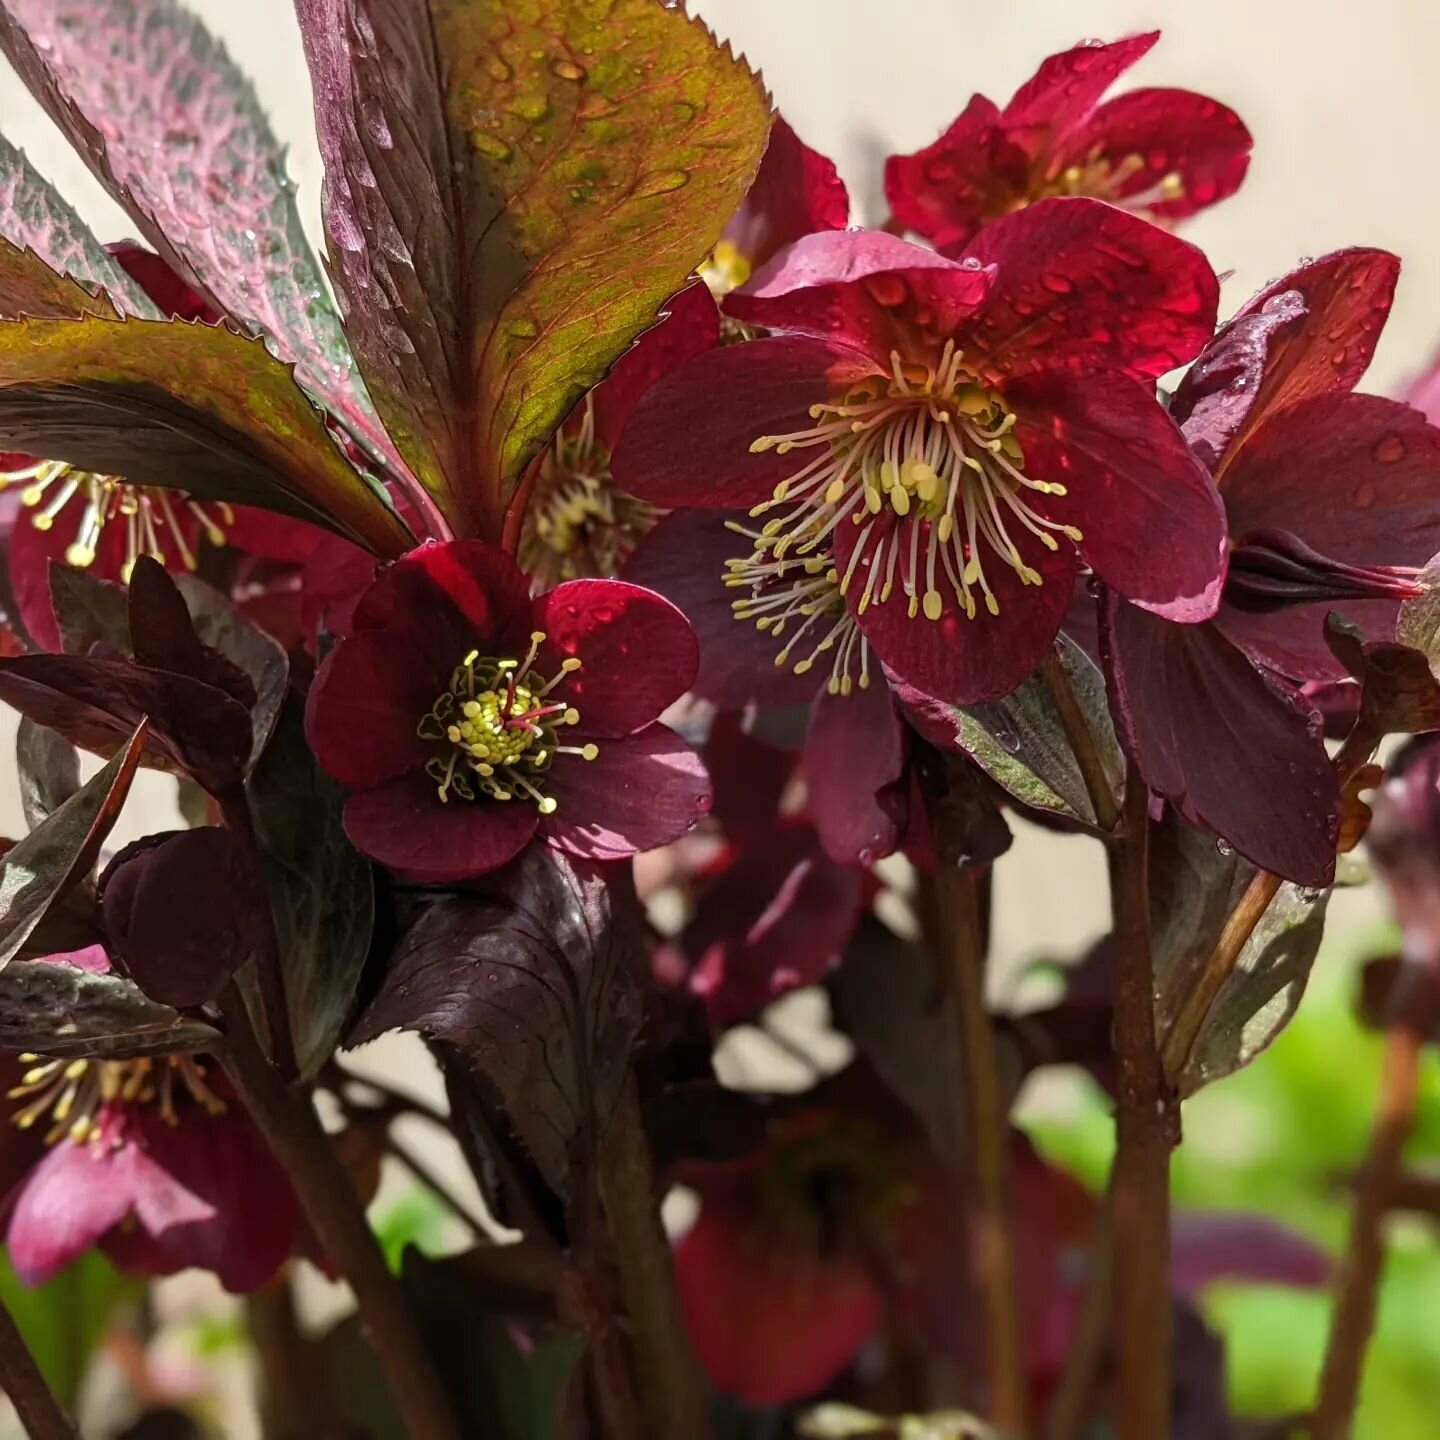 April showers bring May flowers but so does Water Whys Irrigation #waterwhysirrigation #waterwhys #hellebores